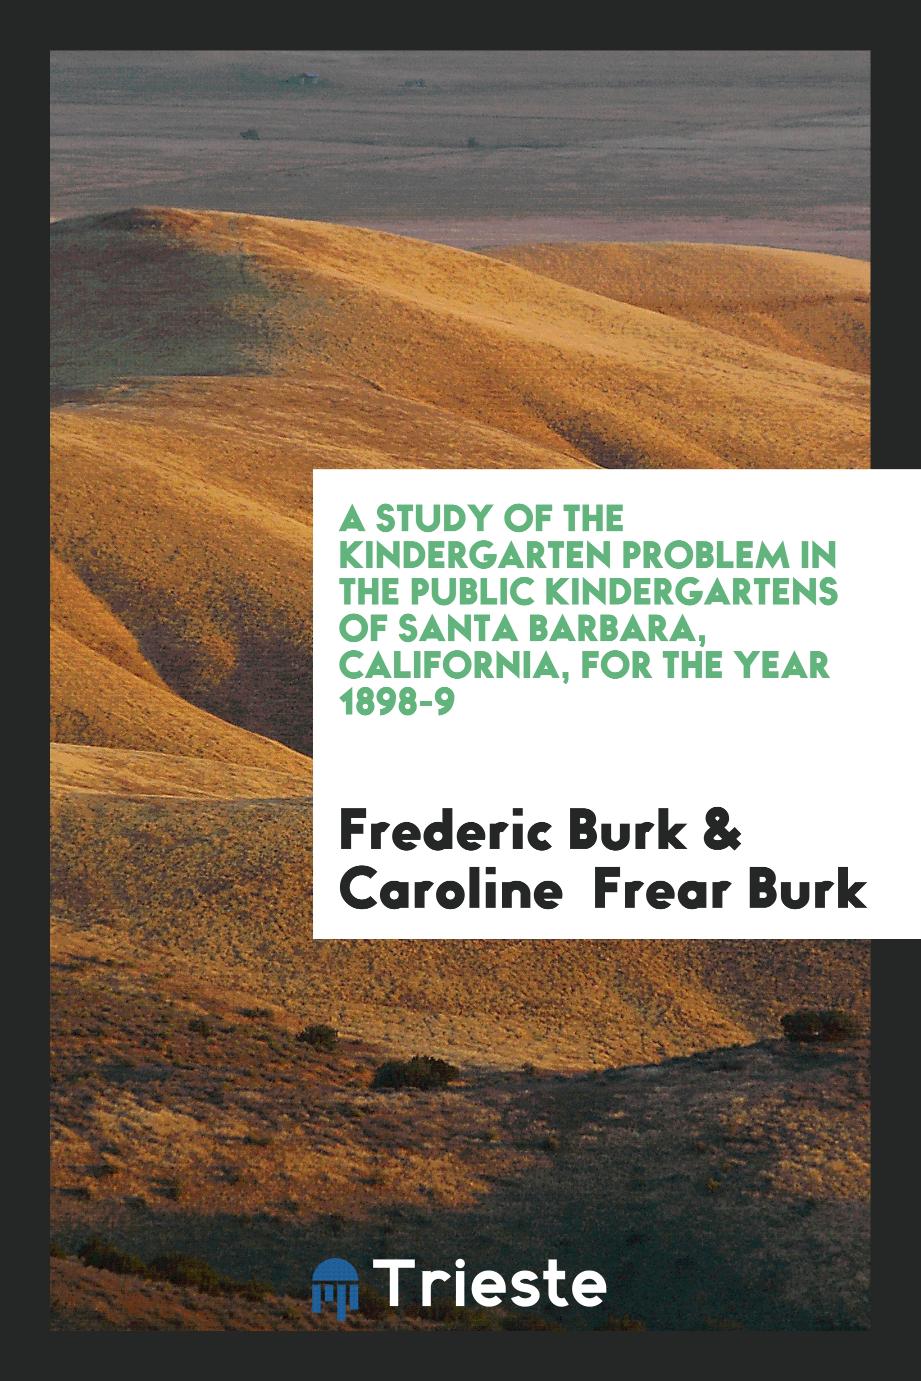 A Study of the Kindergarten Problem in the Public Kindergartens of Santa Barbara, California, for the Year 1898-9